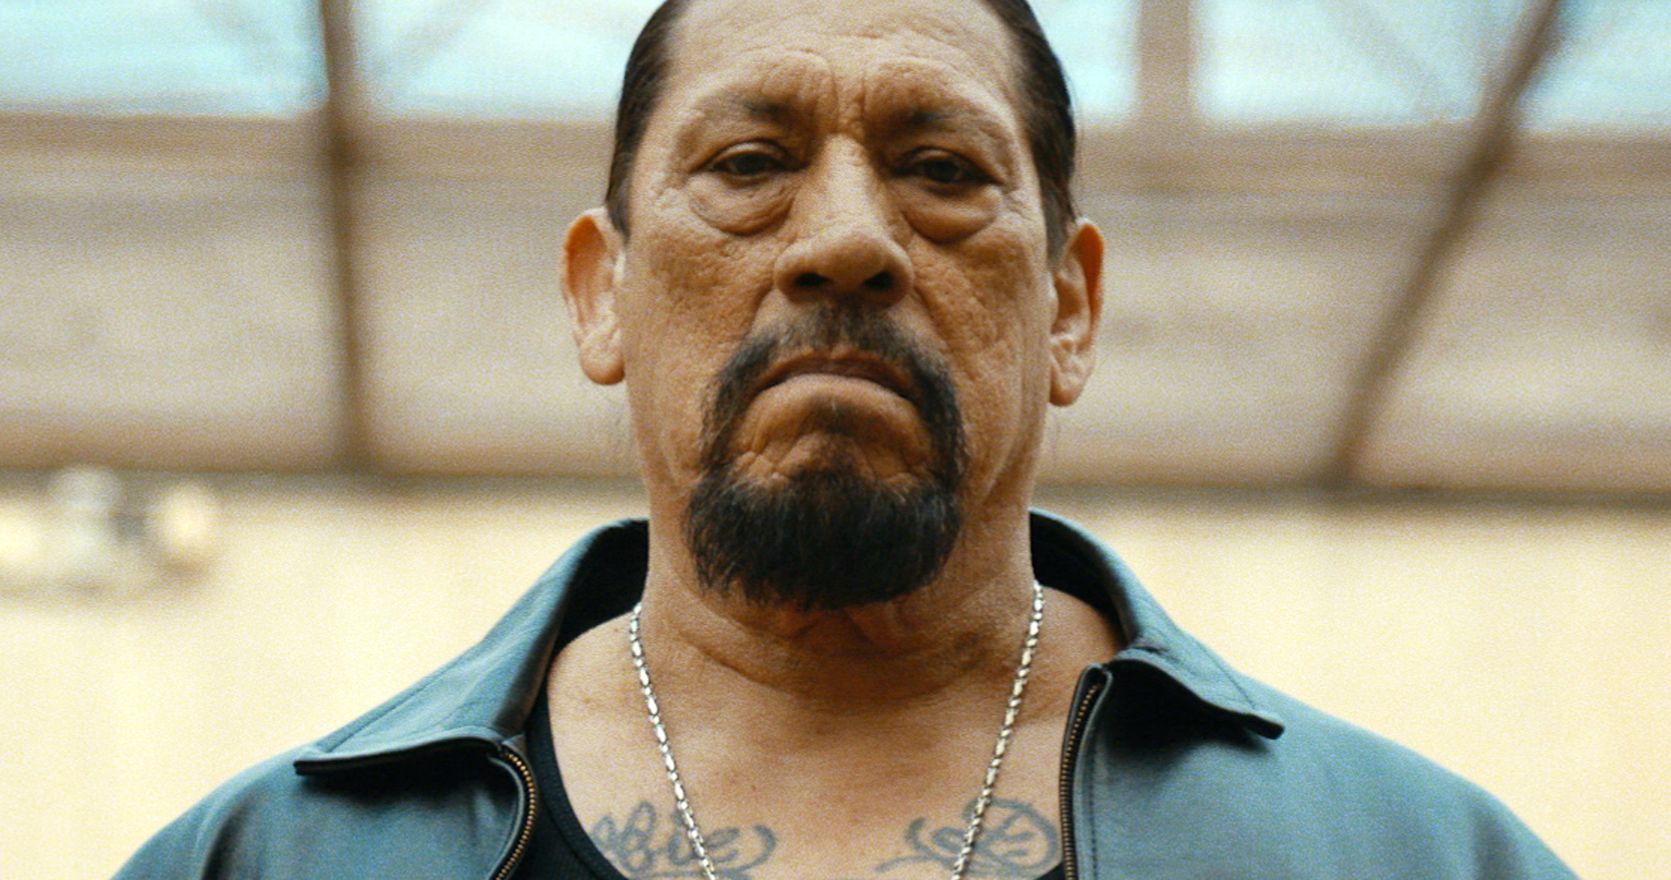 Desperado Cast Talks Meeting Danny Trejo for the First Time in Inmate #1 Documentary [Exclusive]